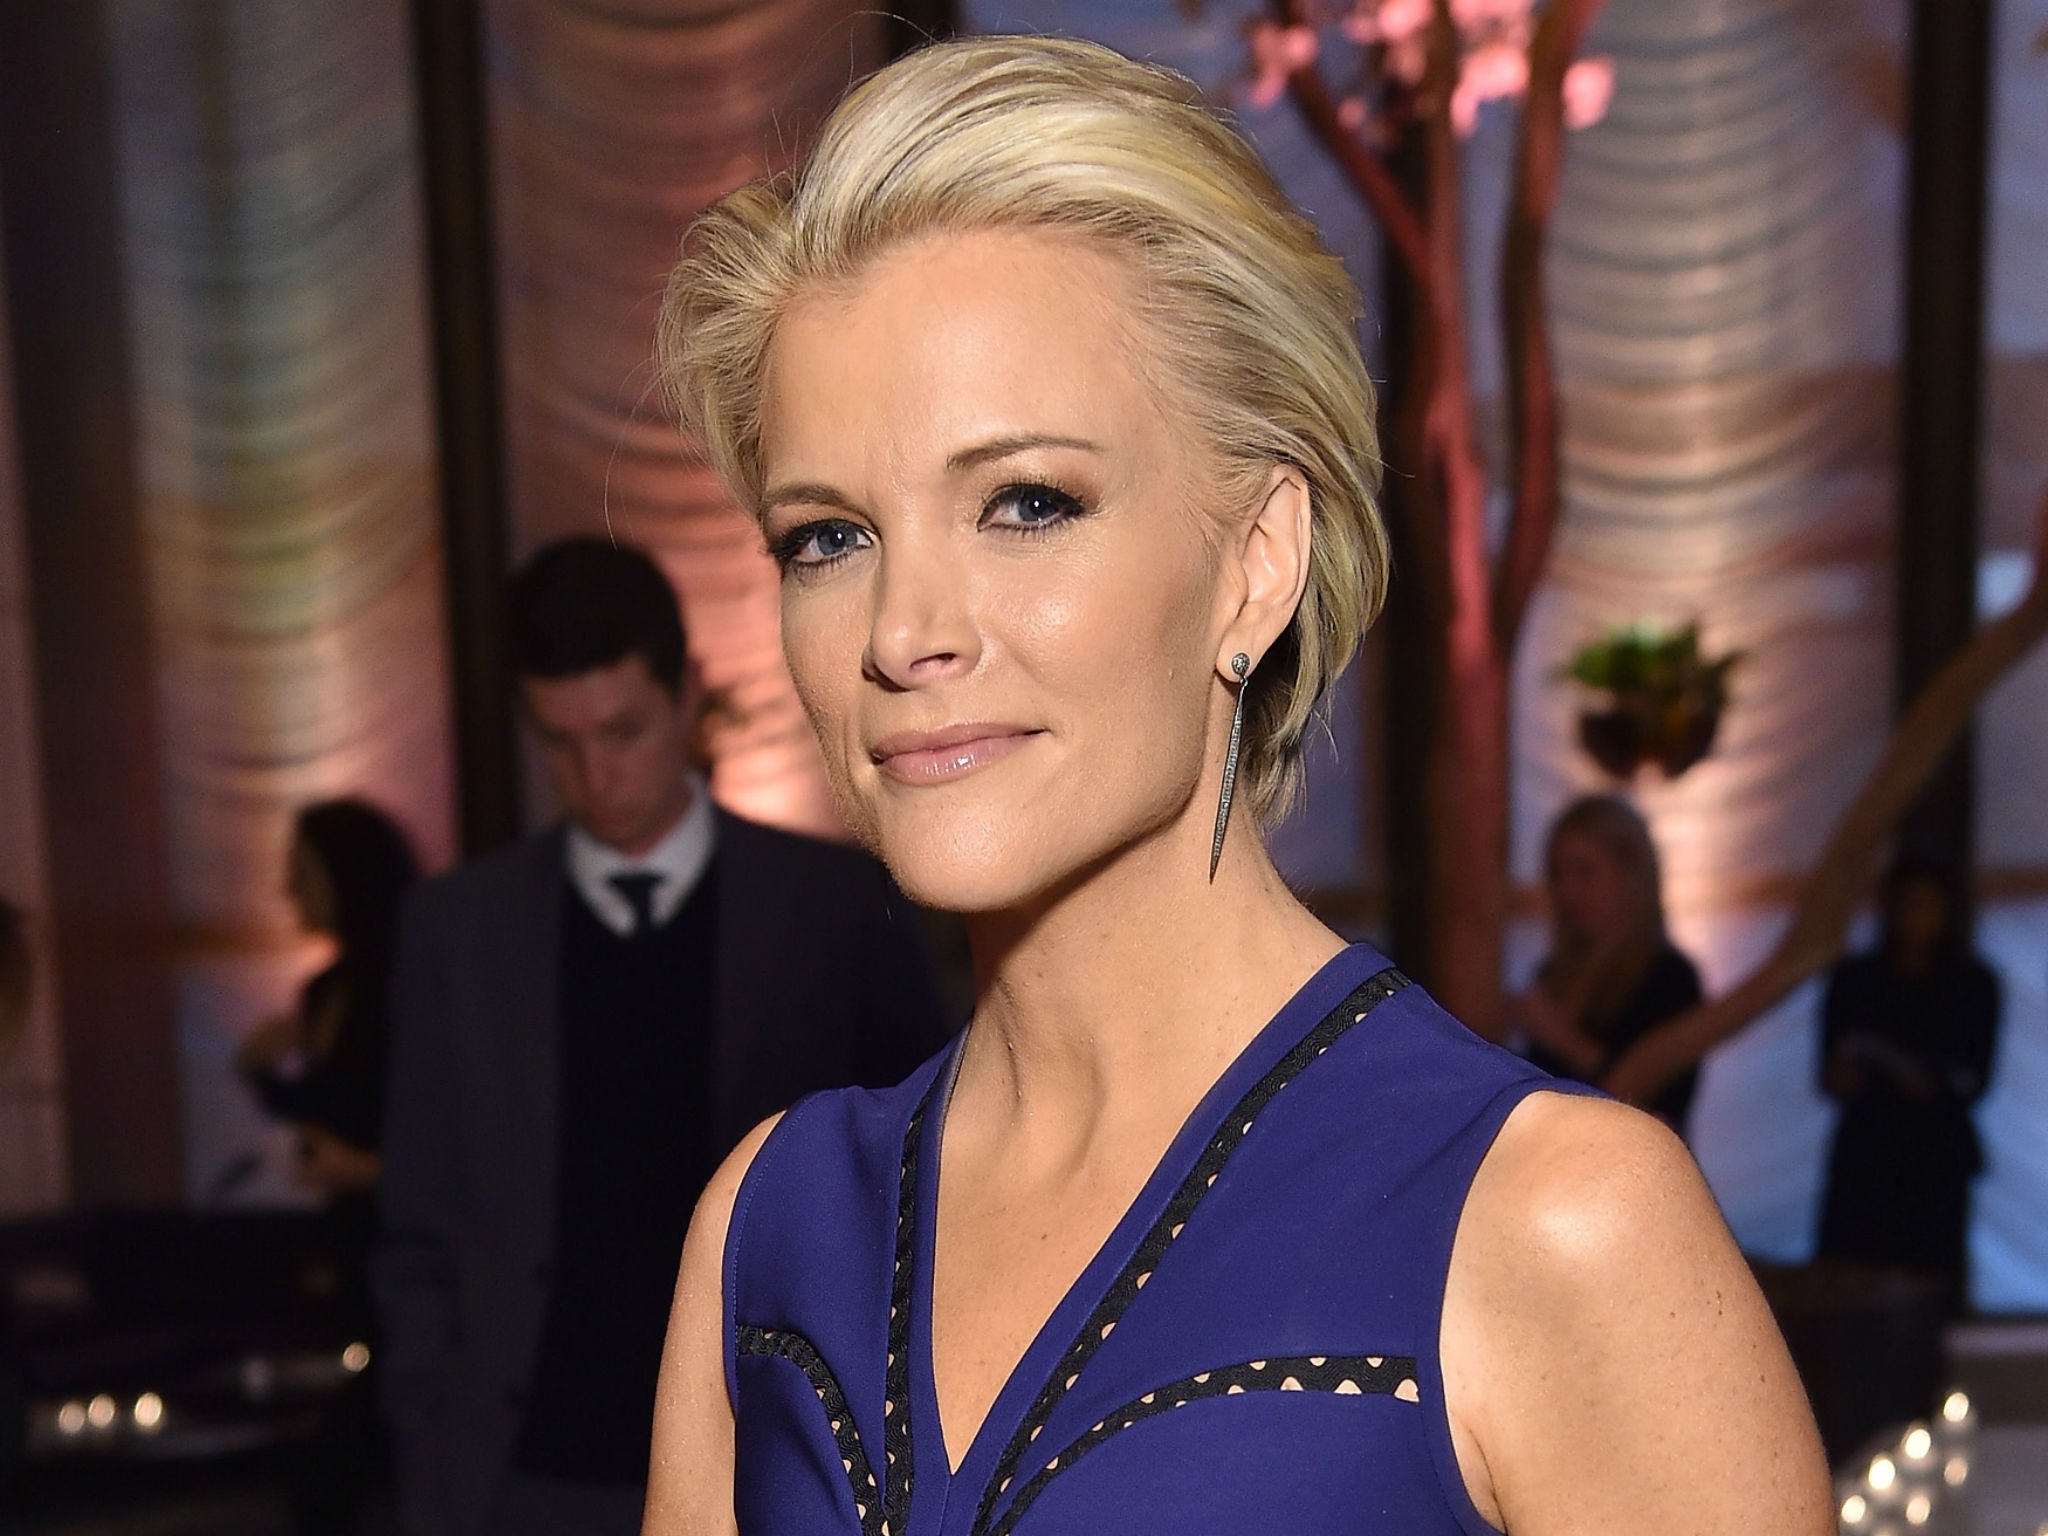 Megyn Kelly's contract with Fox expires next year